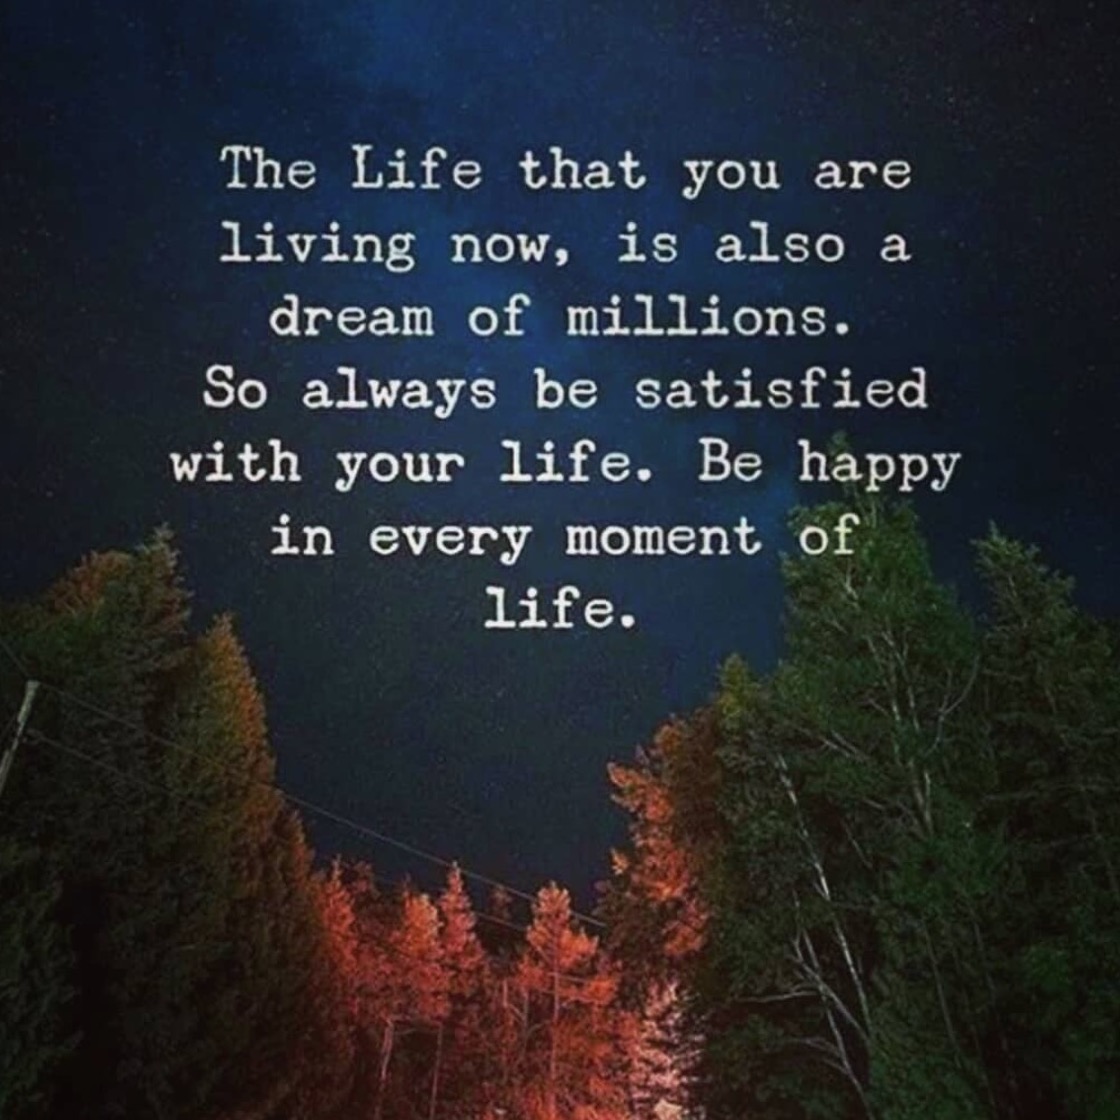 The Life That You Are Living